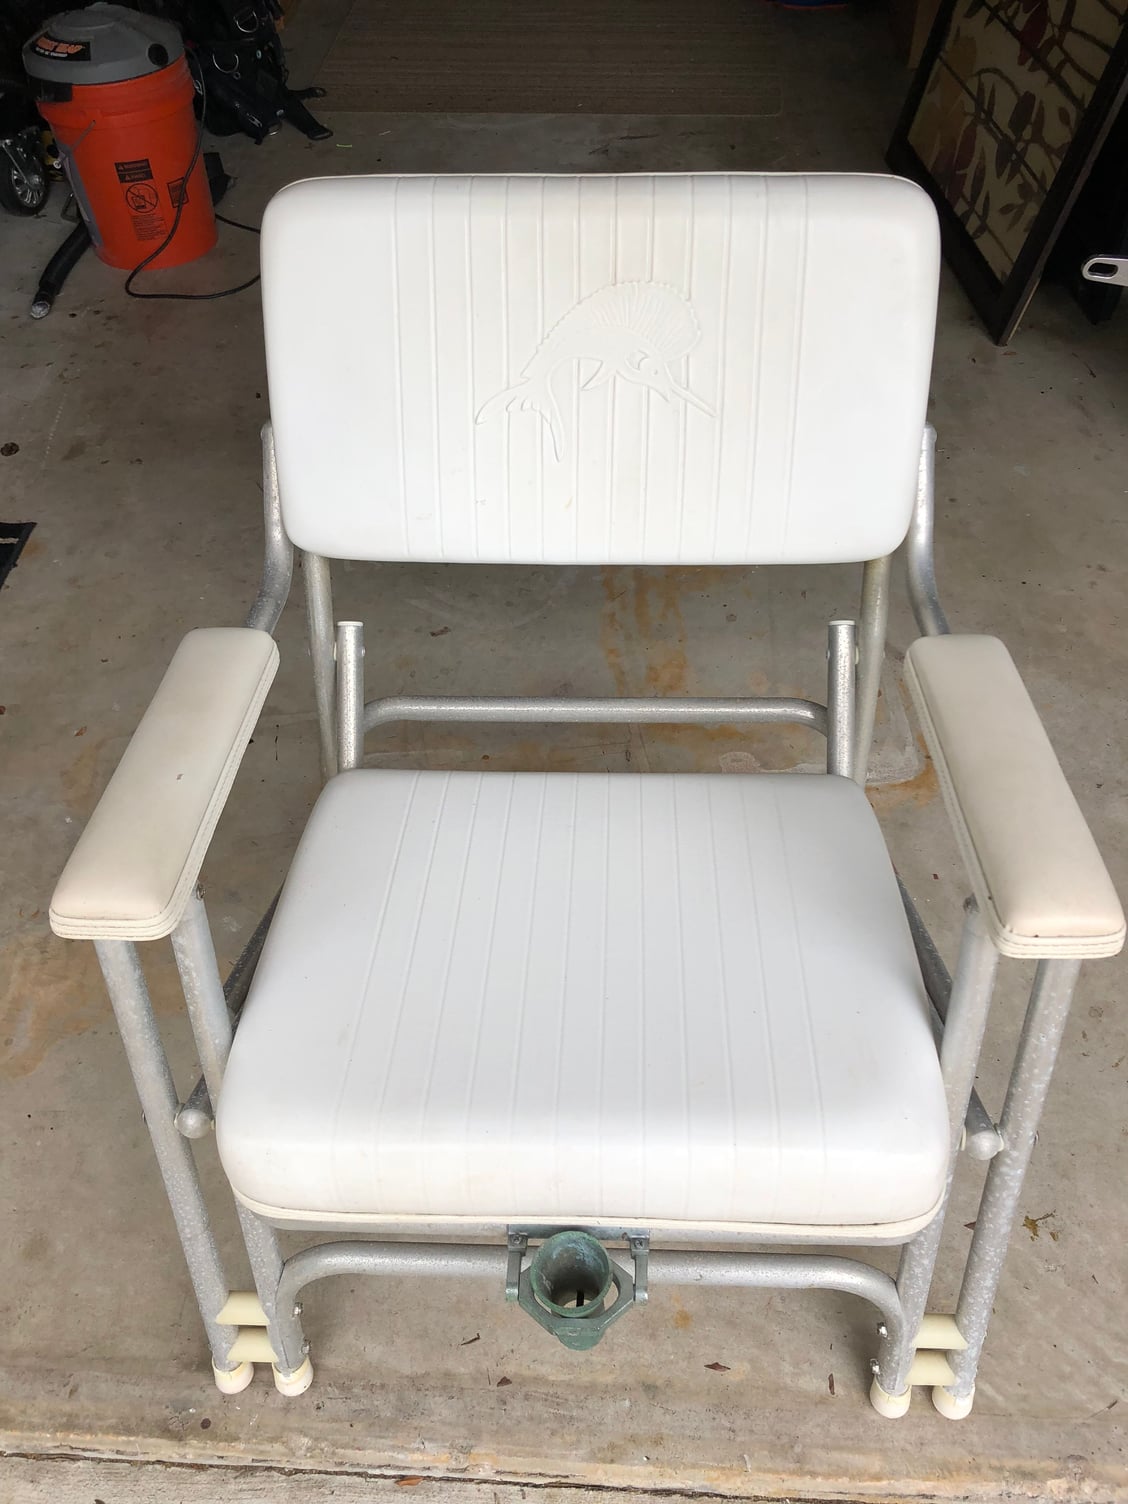 Garelick EZ-IN fighting deck chair $50. Sold. - The Hull Truth